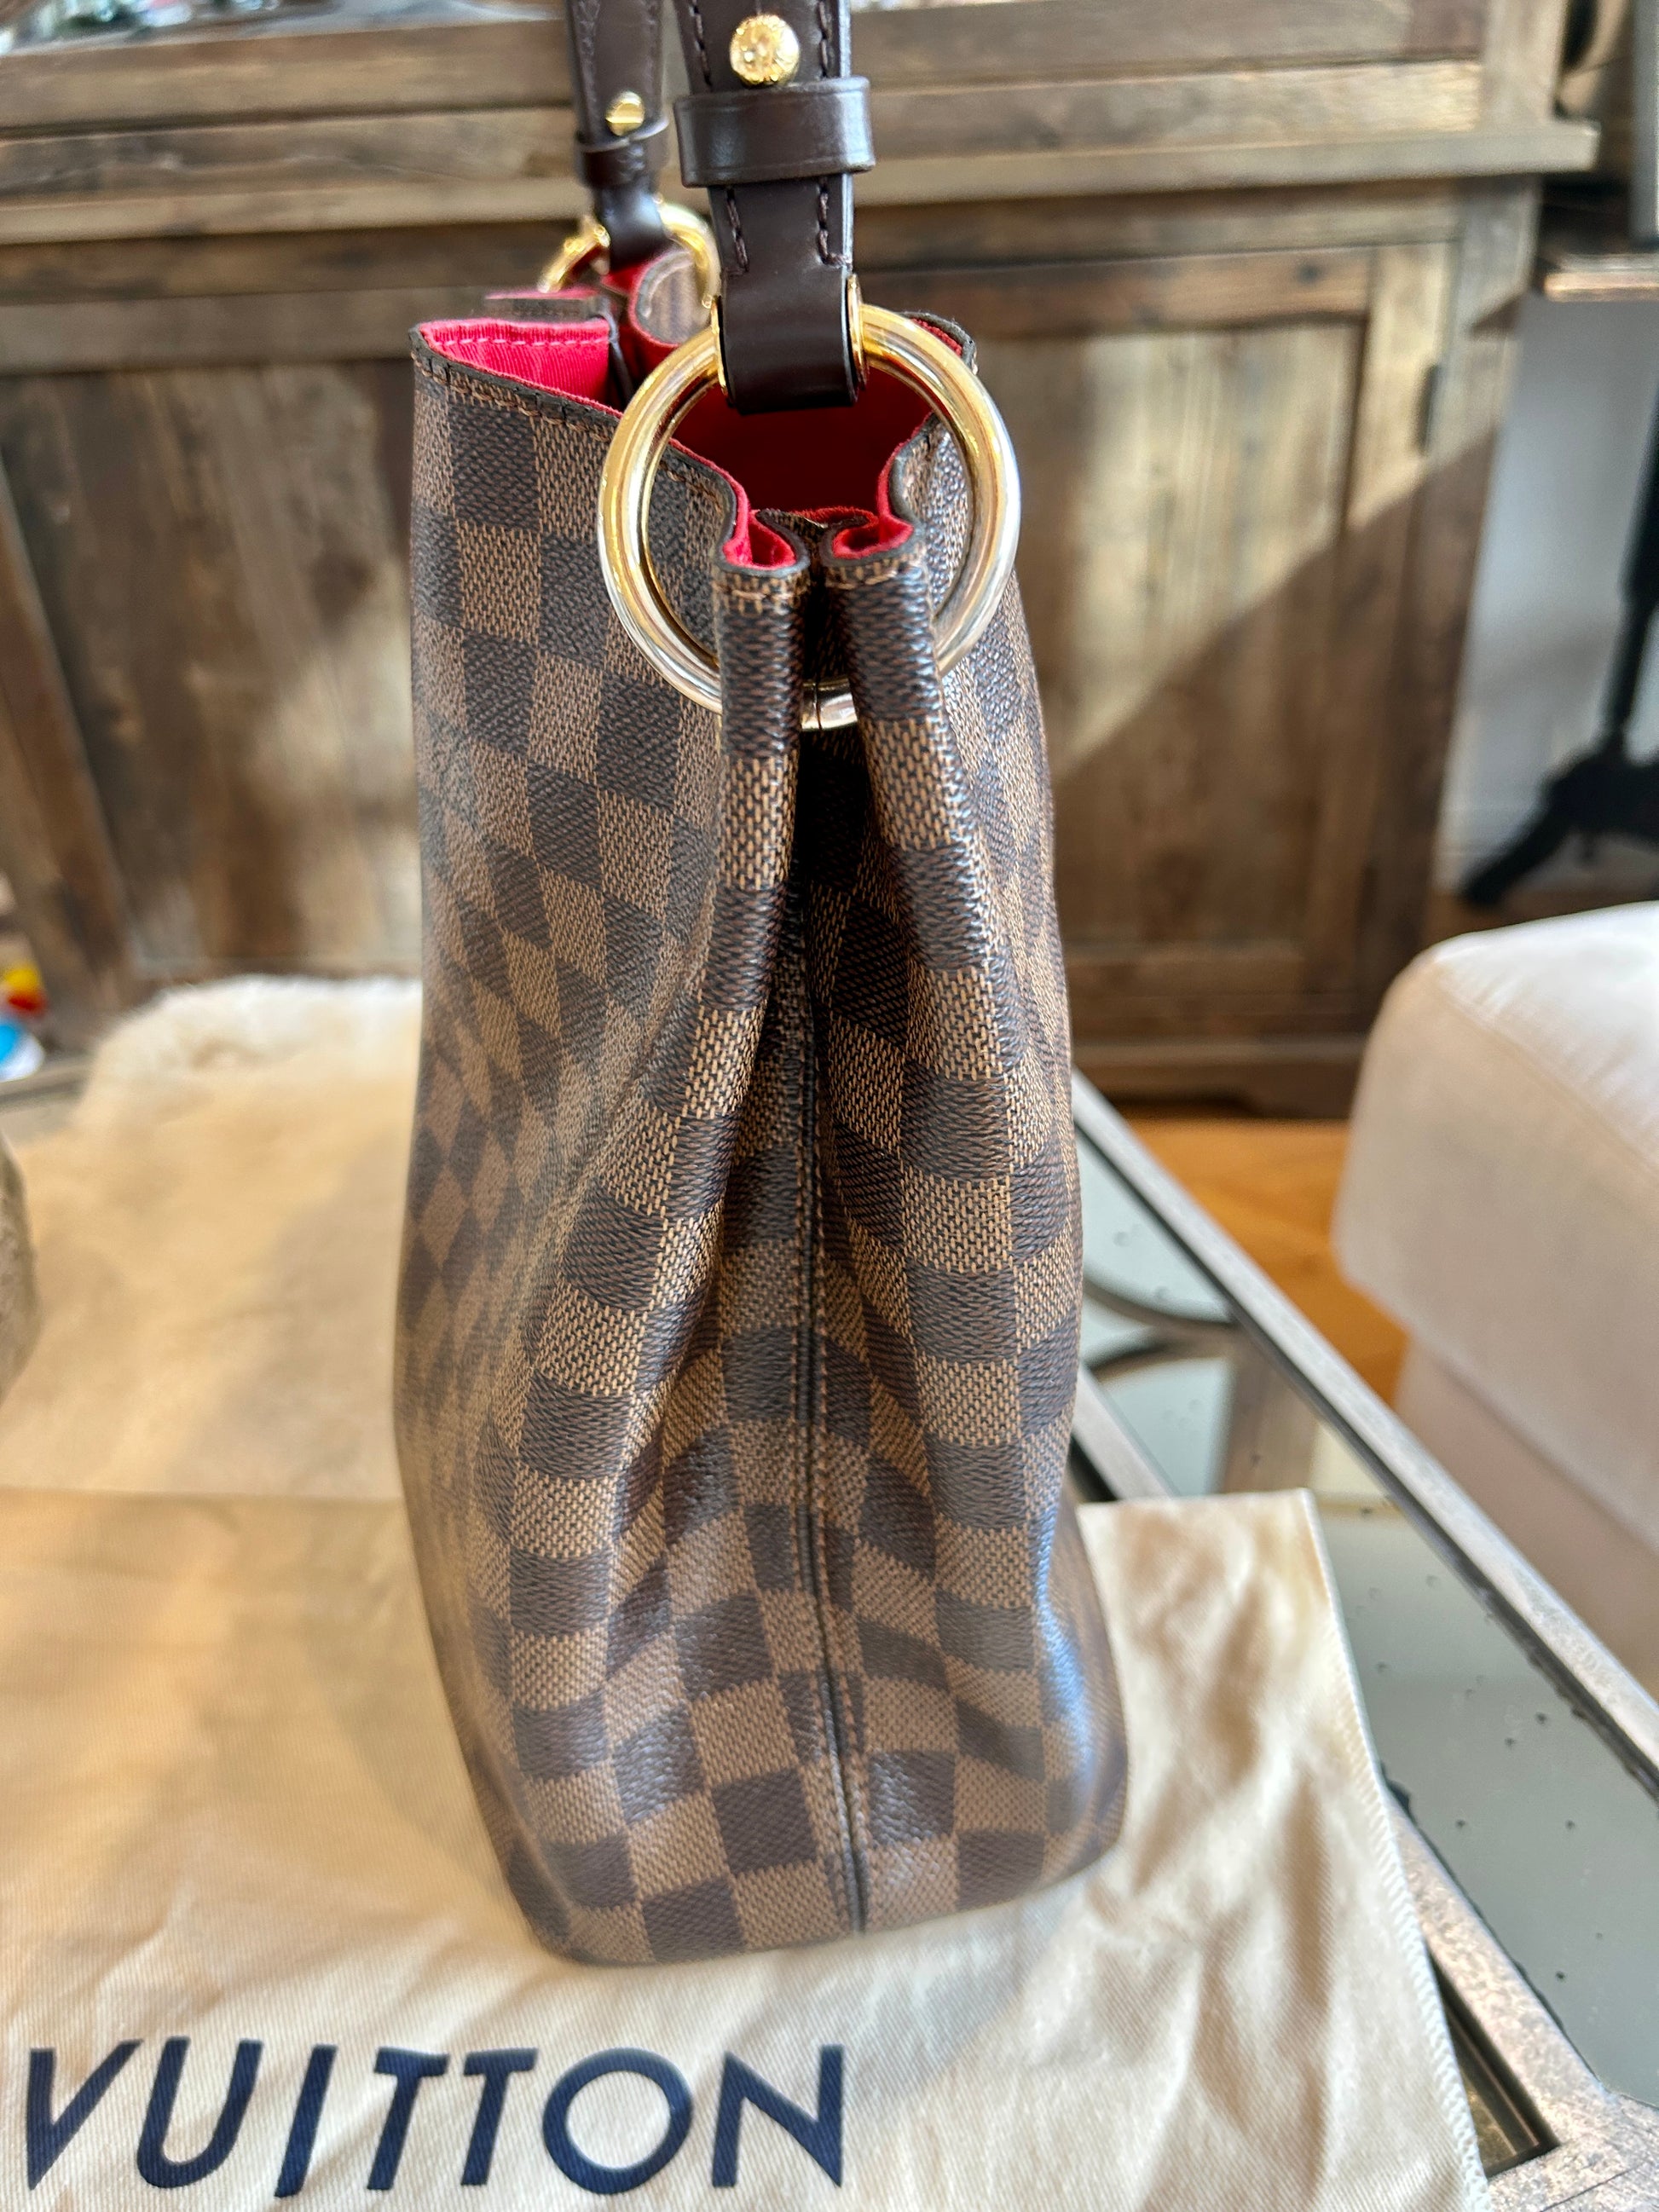 Louis Vuitton, Bags, Neverfull Mm In Damier Ebene With A Cherry Red  Interior